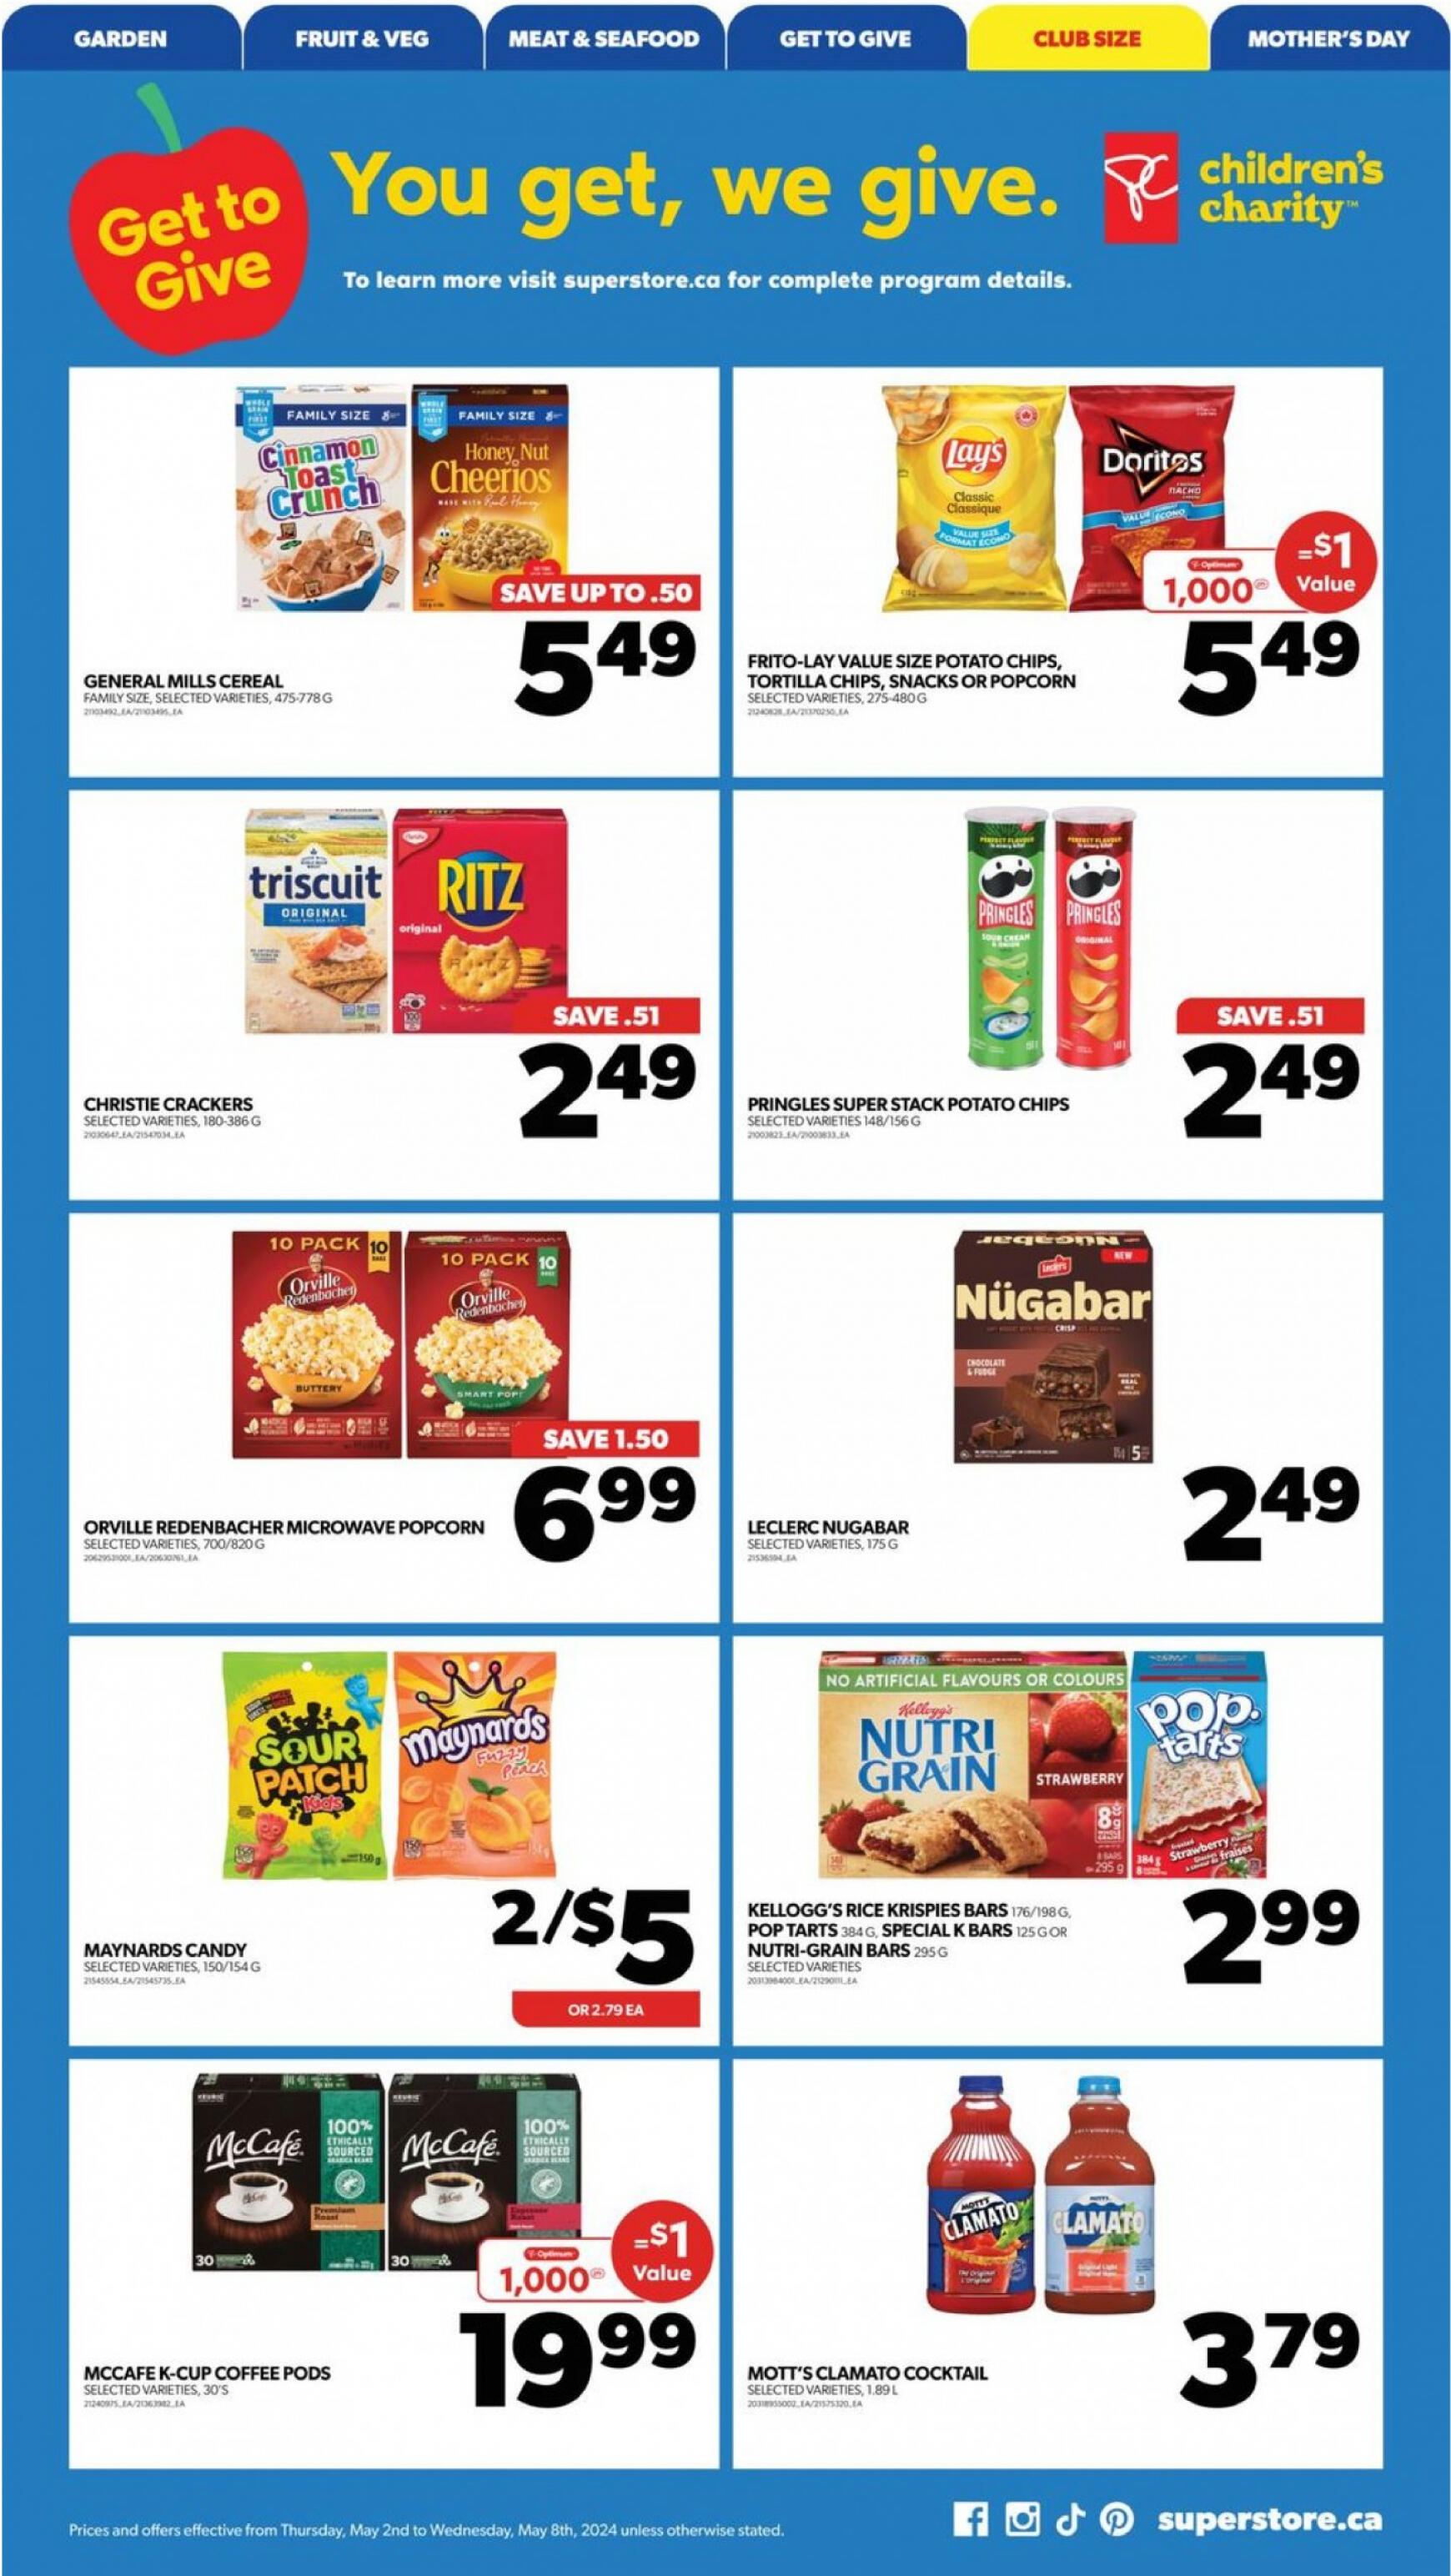 real-canadian-superstore - Real Canadian Superstore flyer current 02.05. - 08.05. - page: 12